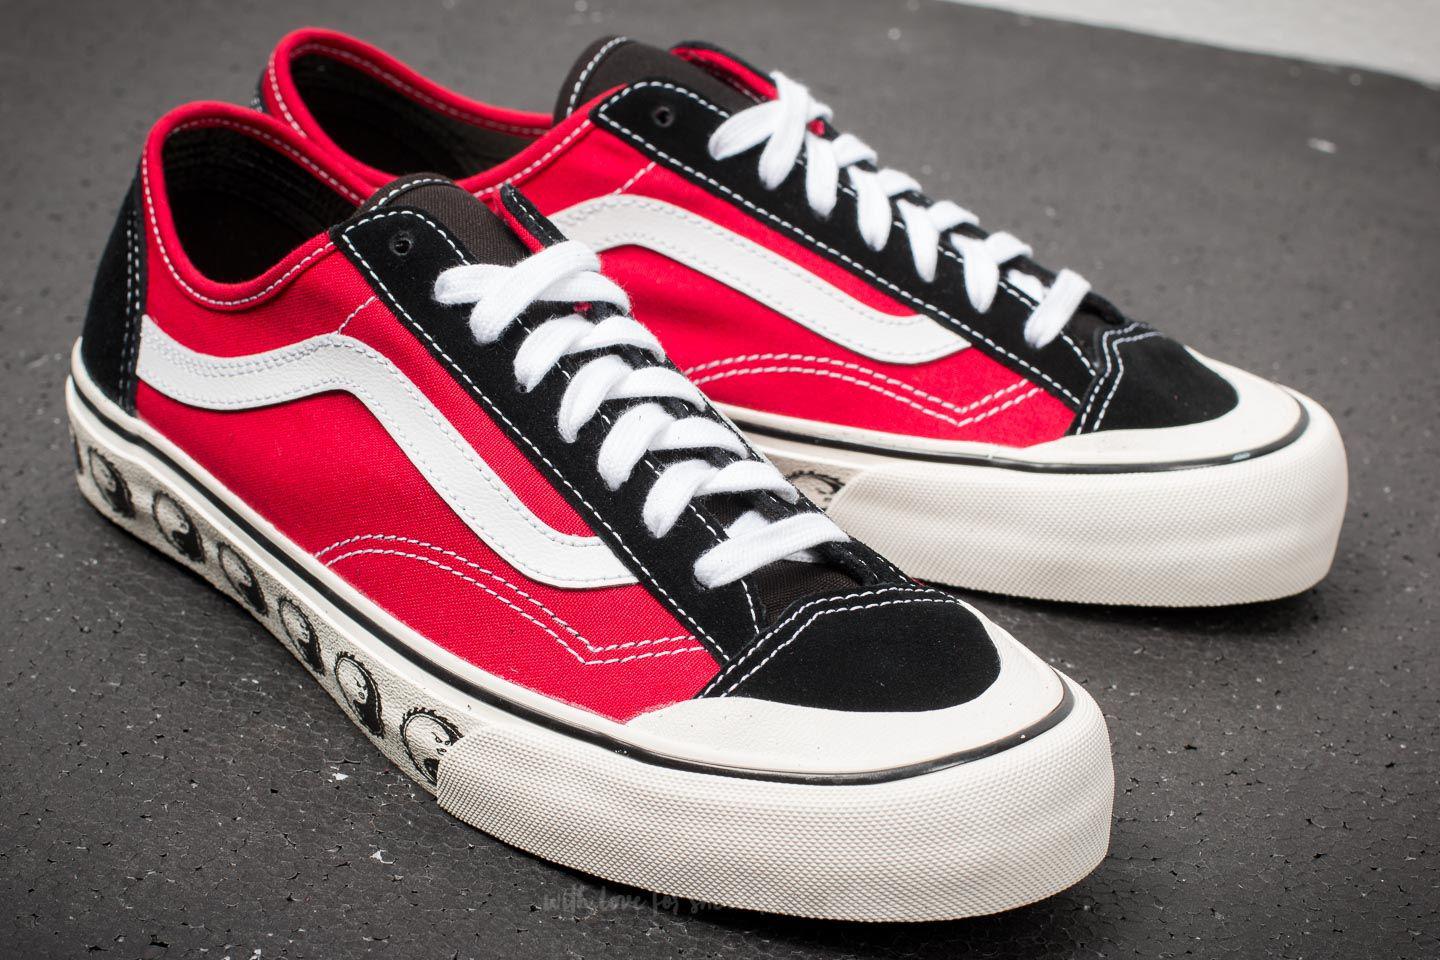 vans style 36 decon sf red